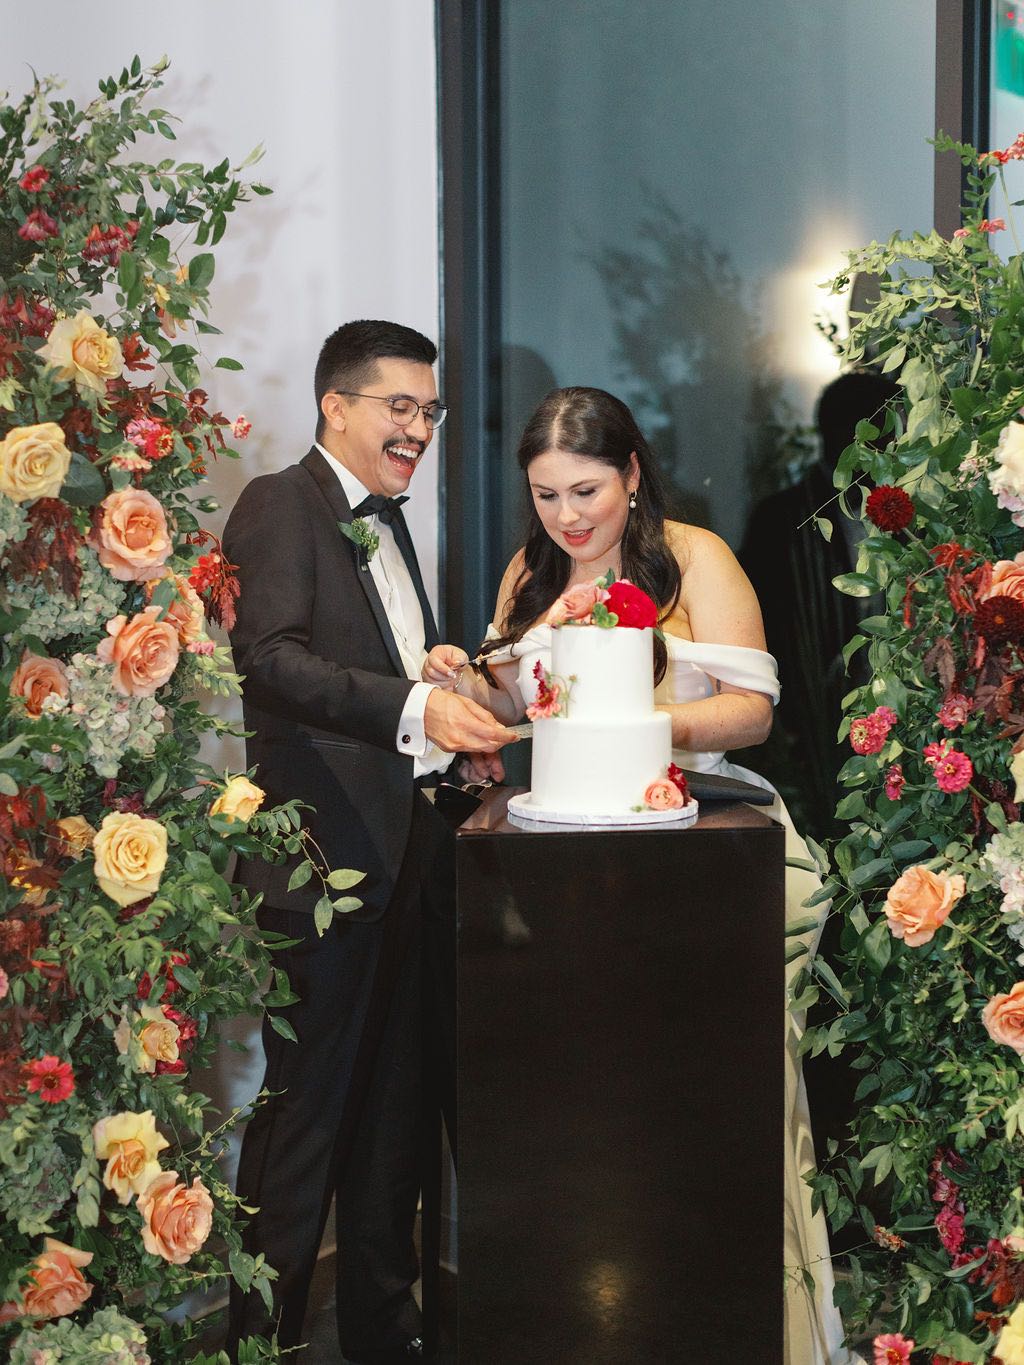 Couple cutting their cake surrounded by colorful plum and burgundy flowers